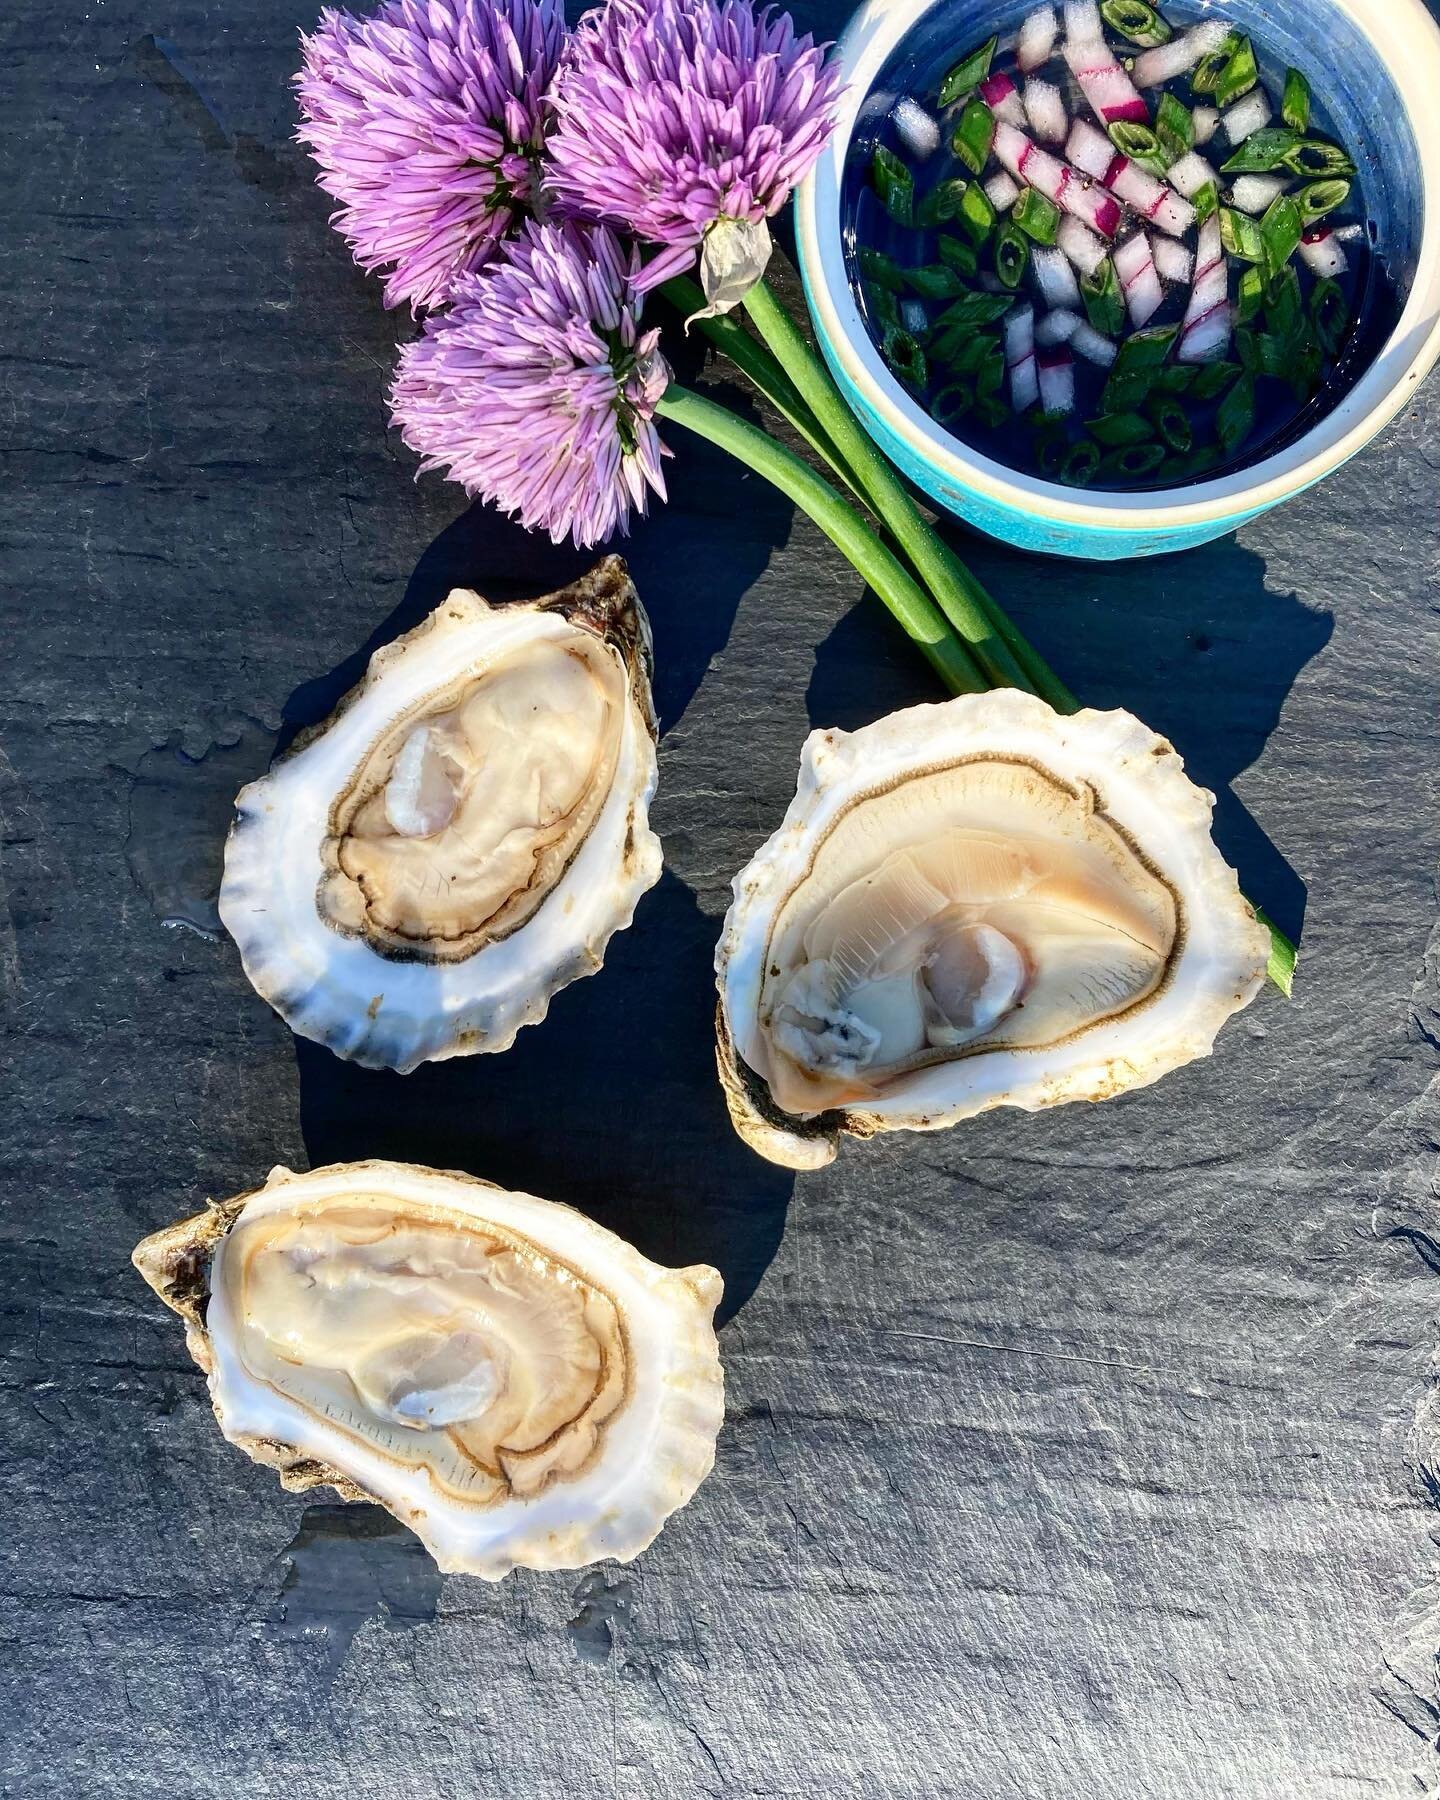 Summer OYSTERS 💦Cranberry Islanders - Sign up for our oyster farm drop at GCI General or LCI CO-OP. Pickup on Wednesdays and Fridays. You can ask for regular delivery the whole summer or add your name by the week. 
If you&rsquo;re on the mainland - 